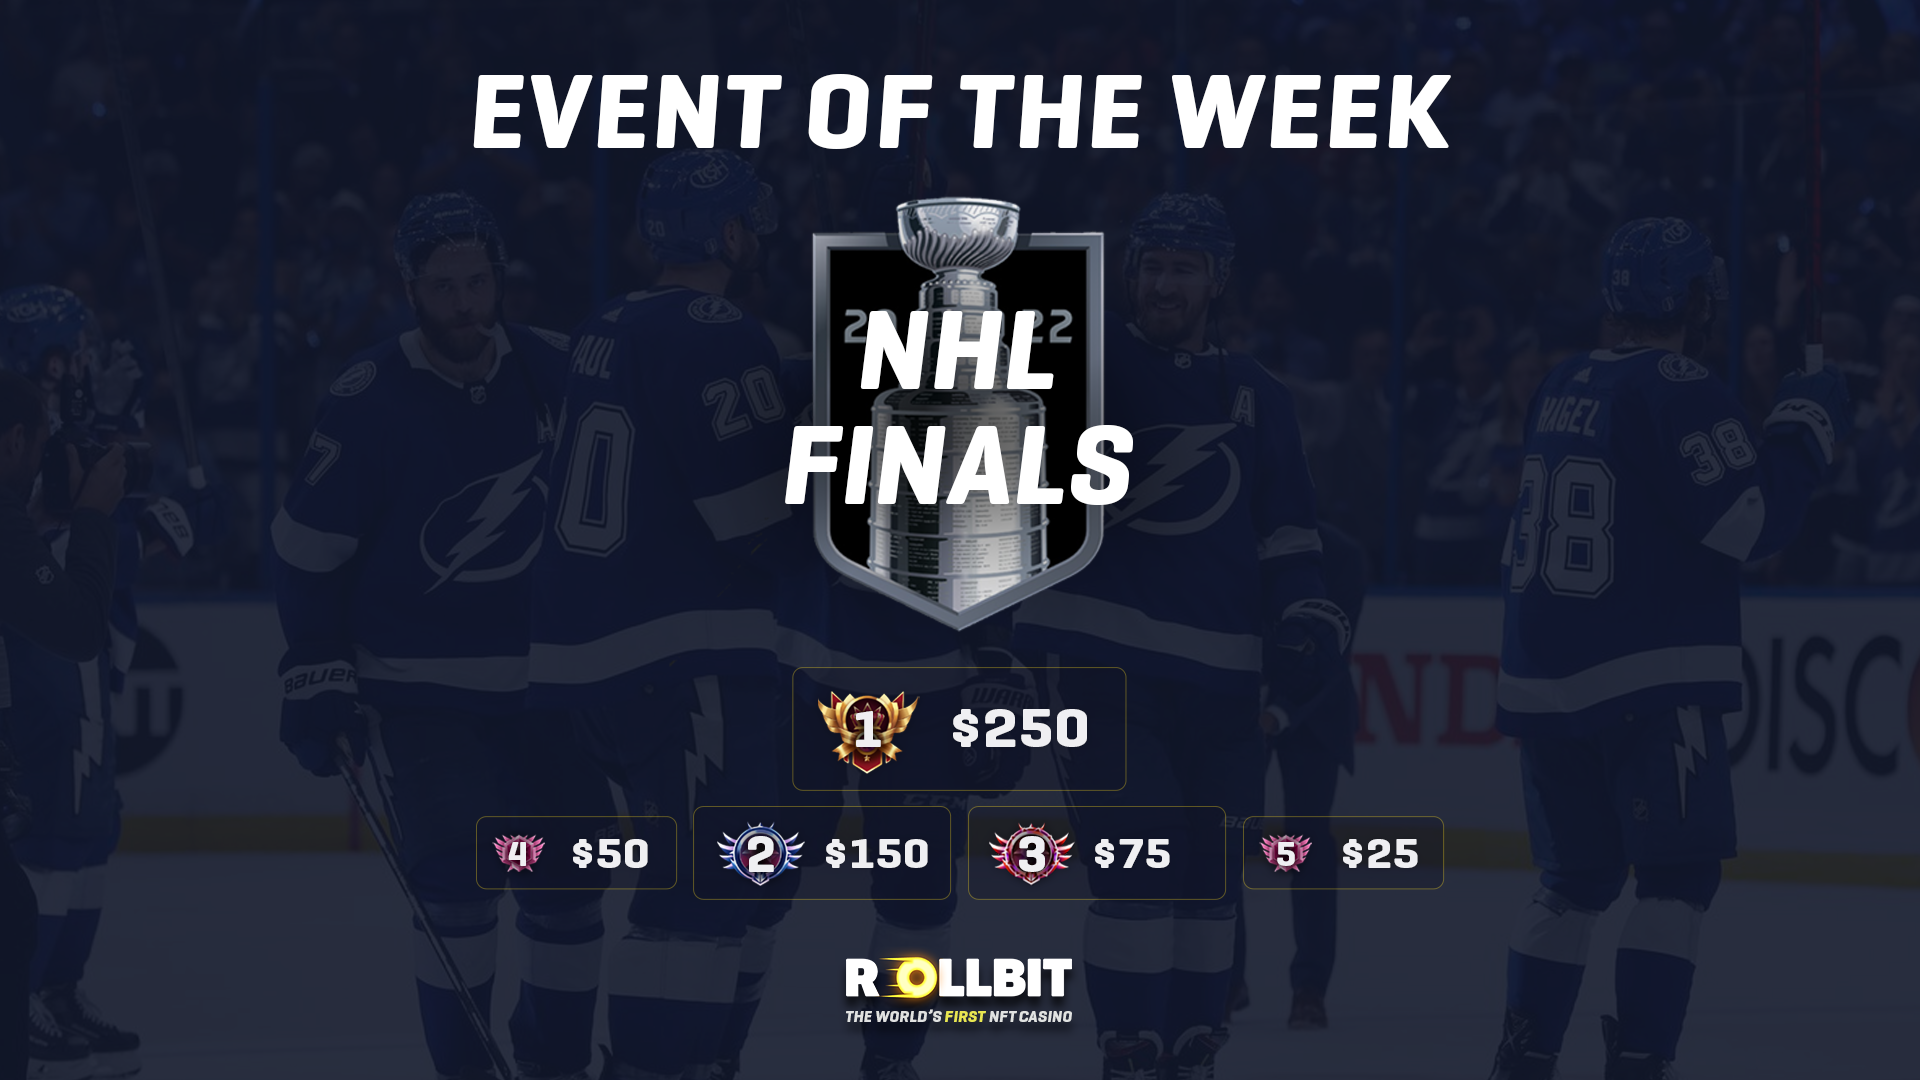 The NHL Finals: Sport Event Of The Week 🏒